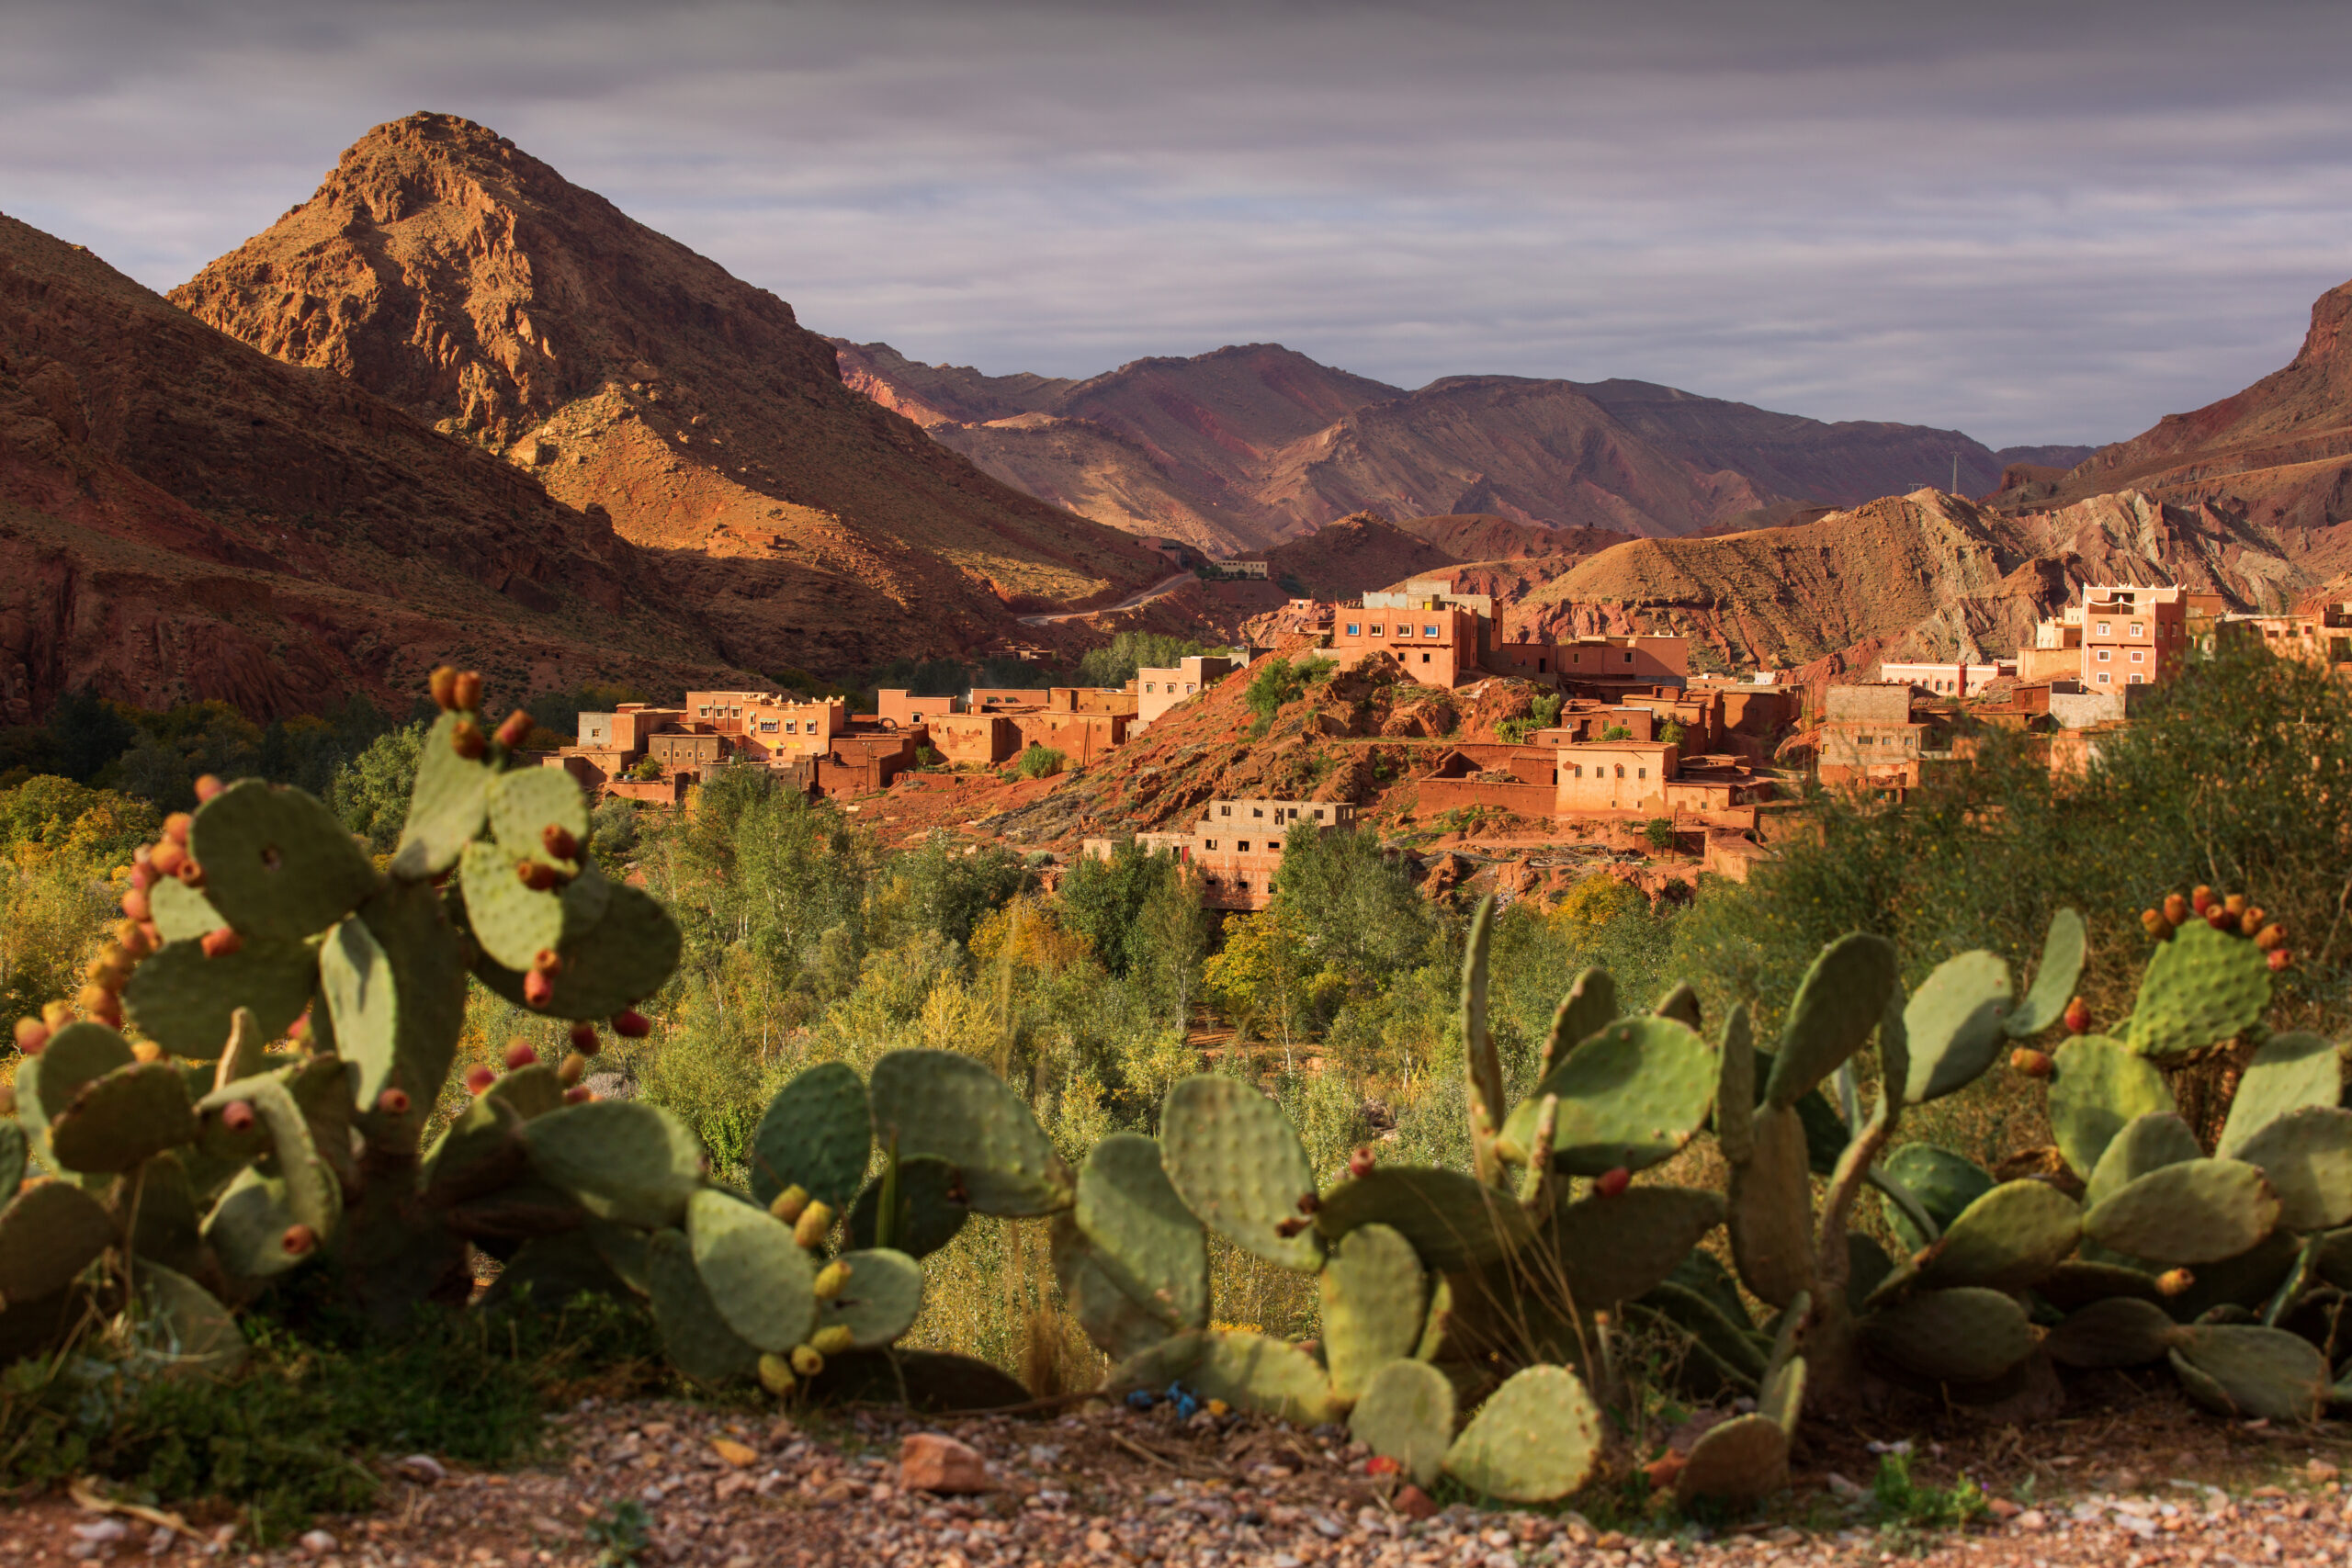 production-services-and-filming-in-marocco-valley